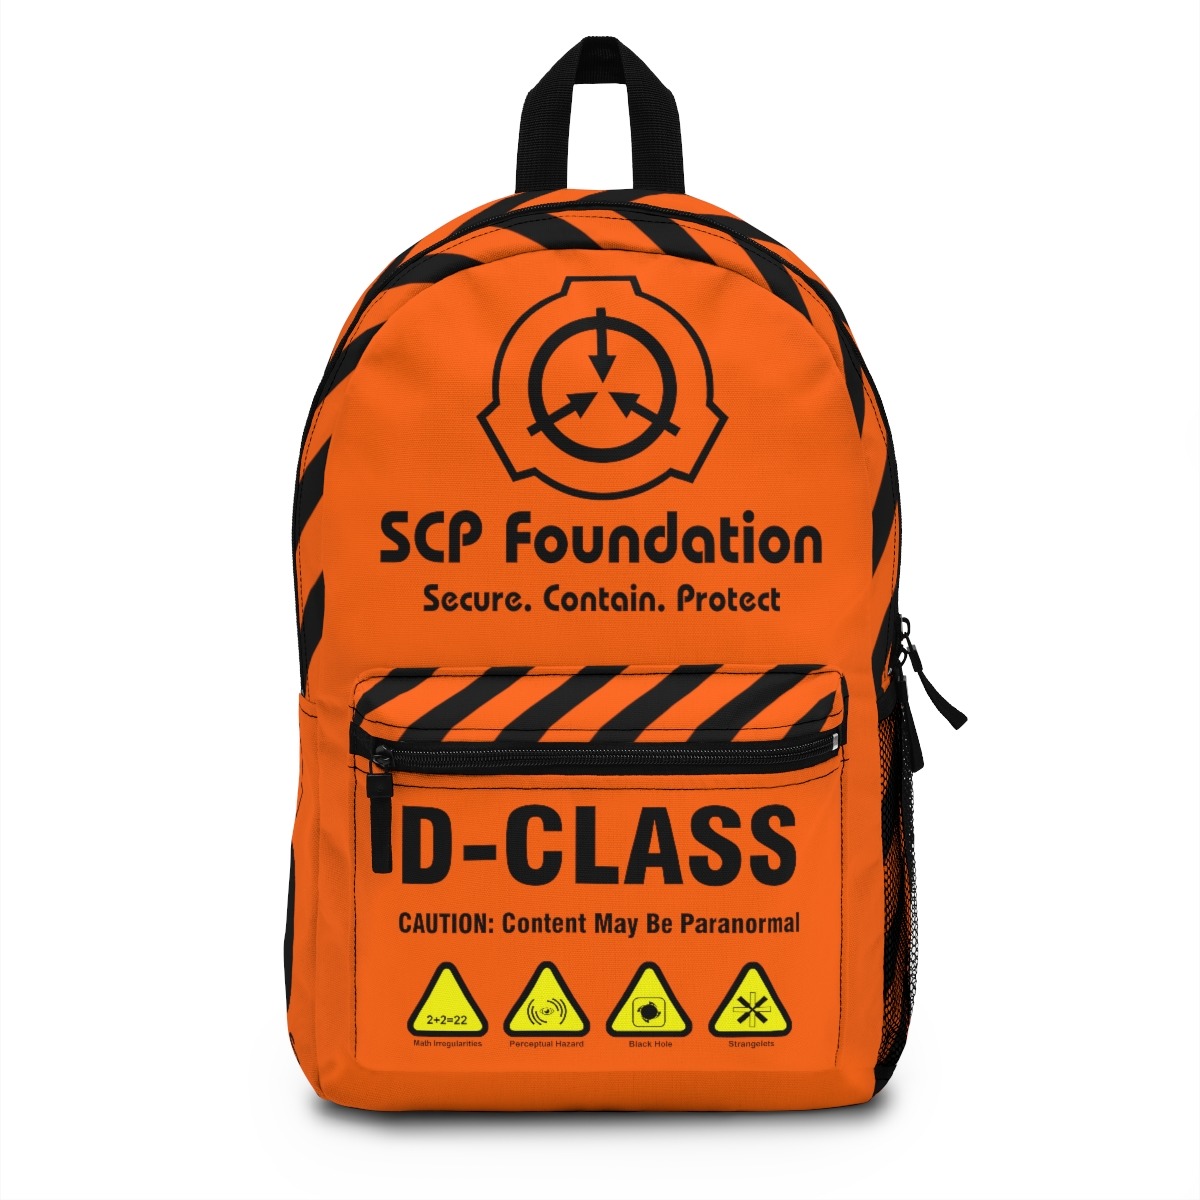 Scp Foundation Gifts & Merchandise for Sale